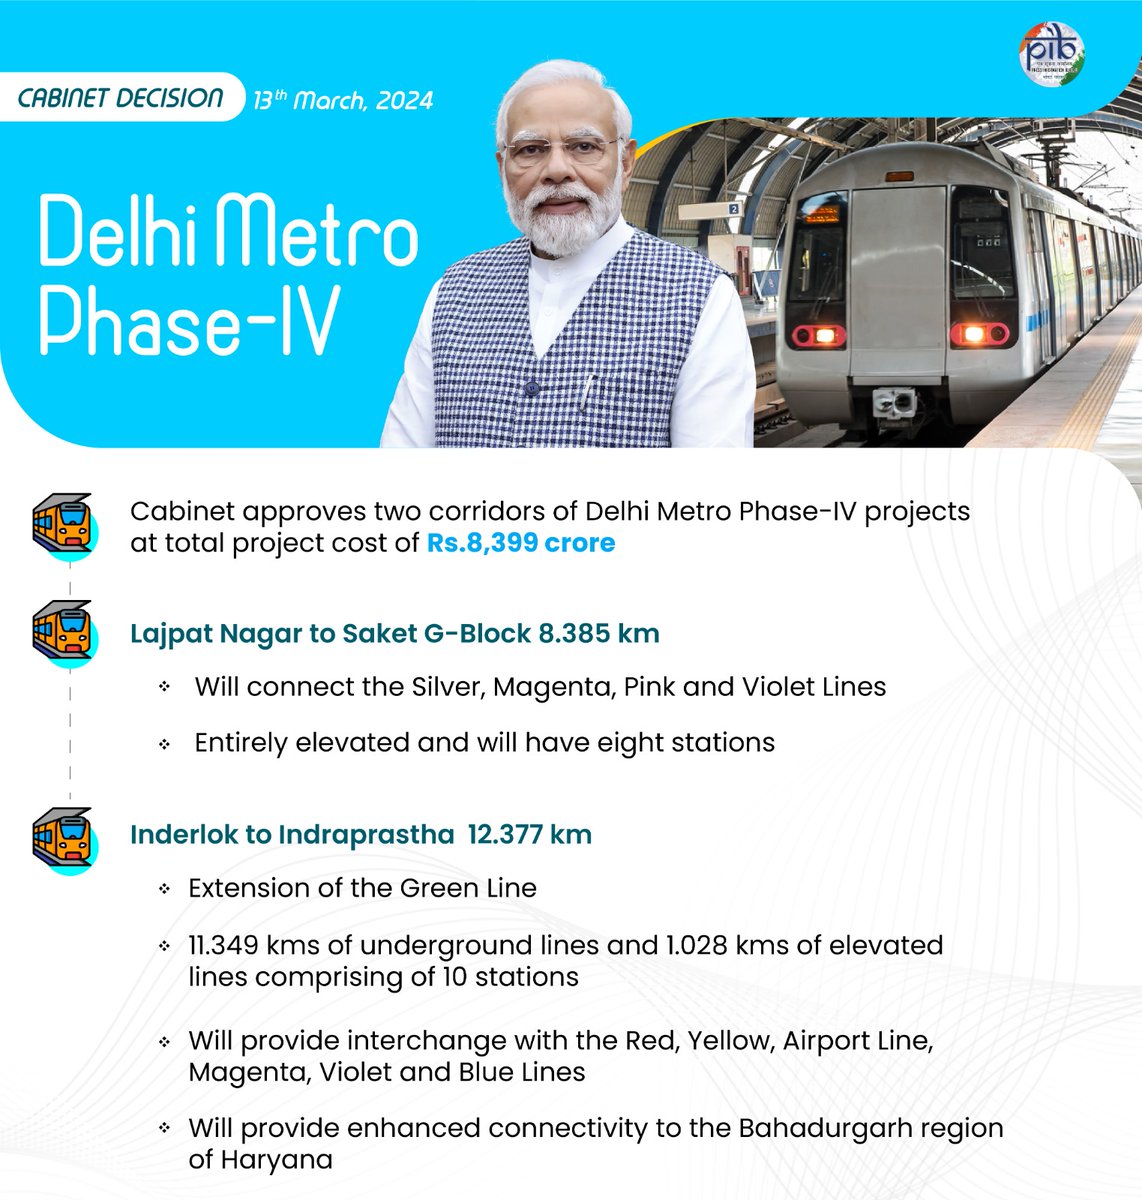 #Cabinet approves two corridors of Delhi Metro Phase-IV projects at total project cost of Rs. 8,399 crore

(i) Lajpat Nagar to Saket G-Block and 
(ii) Inderlok to Indraprastha

These two lines will comprise of 20.762 kms

Read here: pib.gov.in/PressReleseDet…

#CabinetDecisions